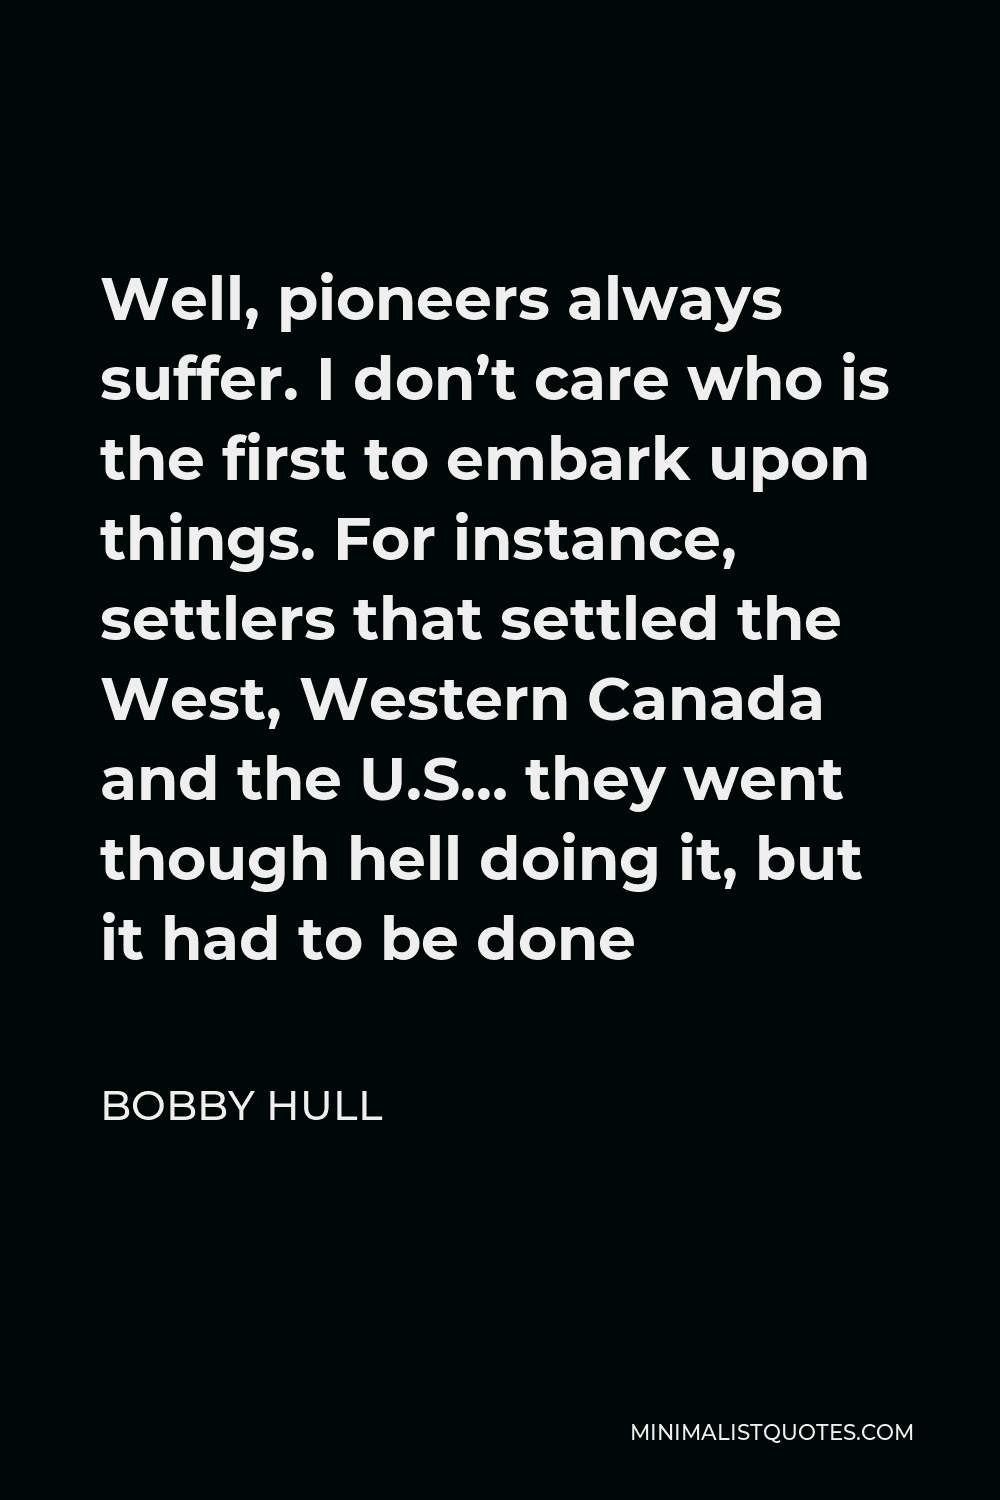 Bobby Hull Quote - Well, pioneers always suffer. I don’t care who is the first to embark upon things. For instance, settlers that settled the West, Western Canada and the U.S… they went though hell doing it, but it had to be done